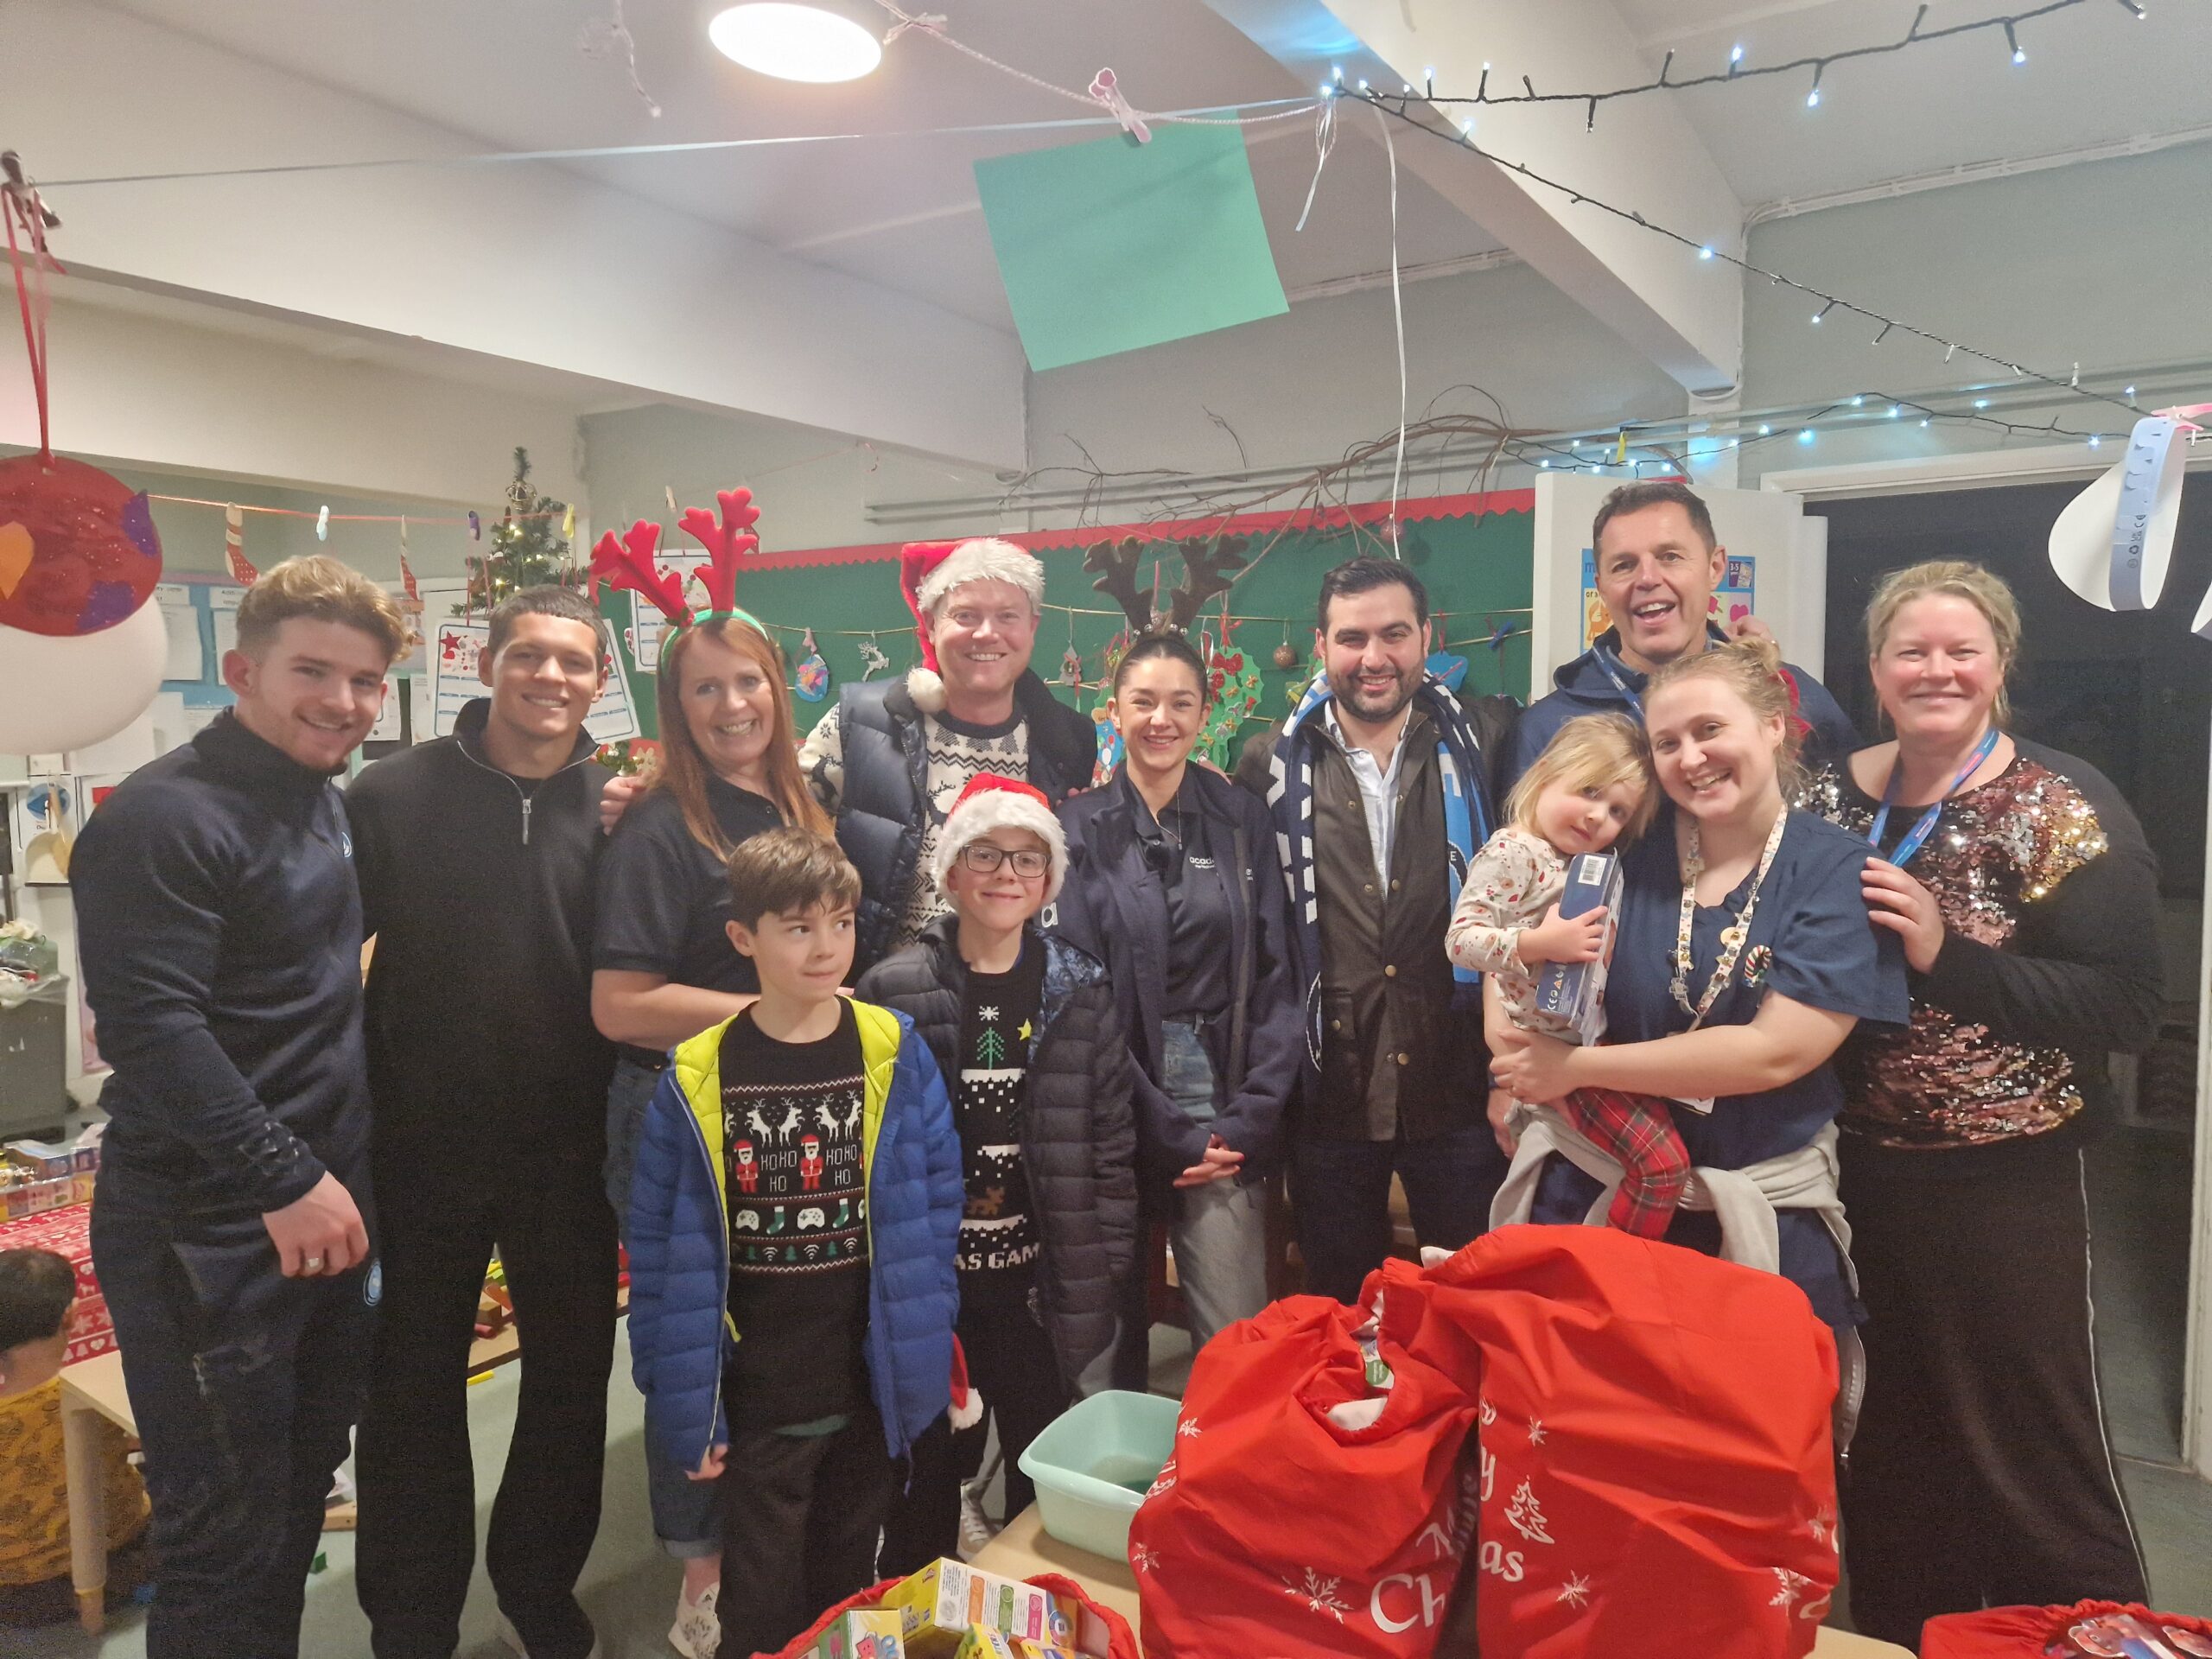 Andrew Harman, Tjay De Barr, Jasper Pattenden along with a nurse and their child during the visit to the staff creche in Wycombe.